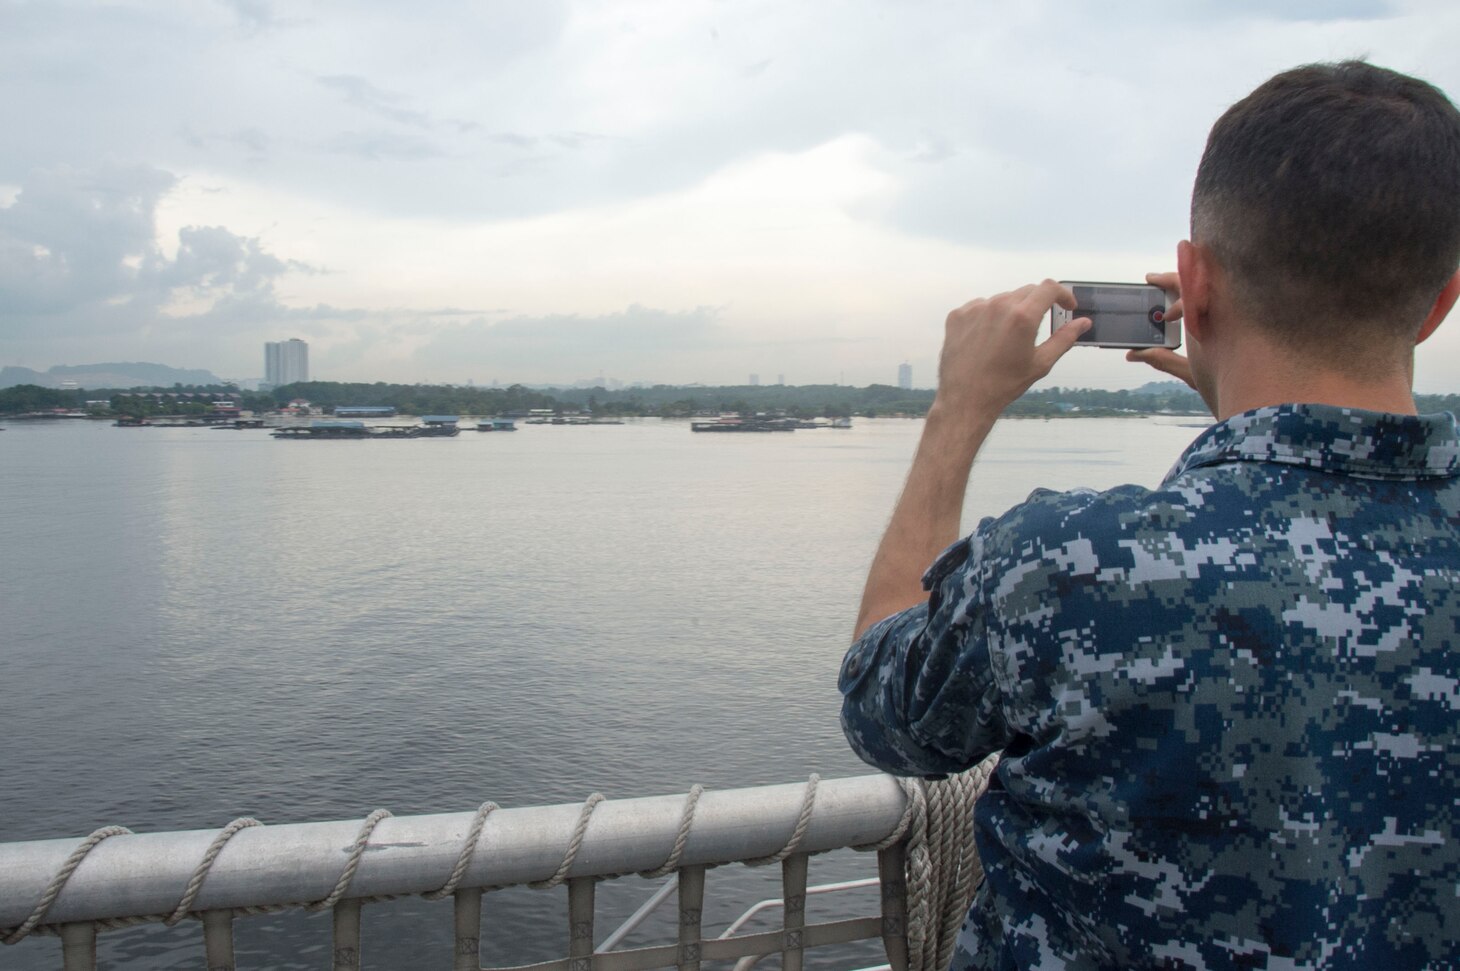 Musician 3rd Class Victor Martinez takes a picture as USNS Millinocket (T-EPF 3) departs Singapore. USNS Millinocket is supporting a U.S. 7th Fleet theater security cooperation mission and will be traveling to several Indo-Pacific countries in the coming weeks.